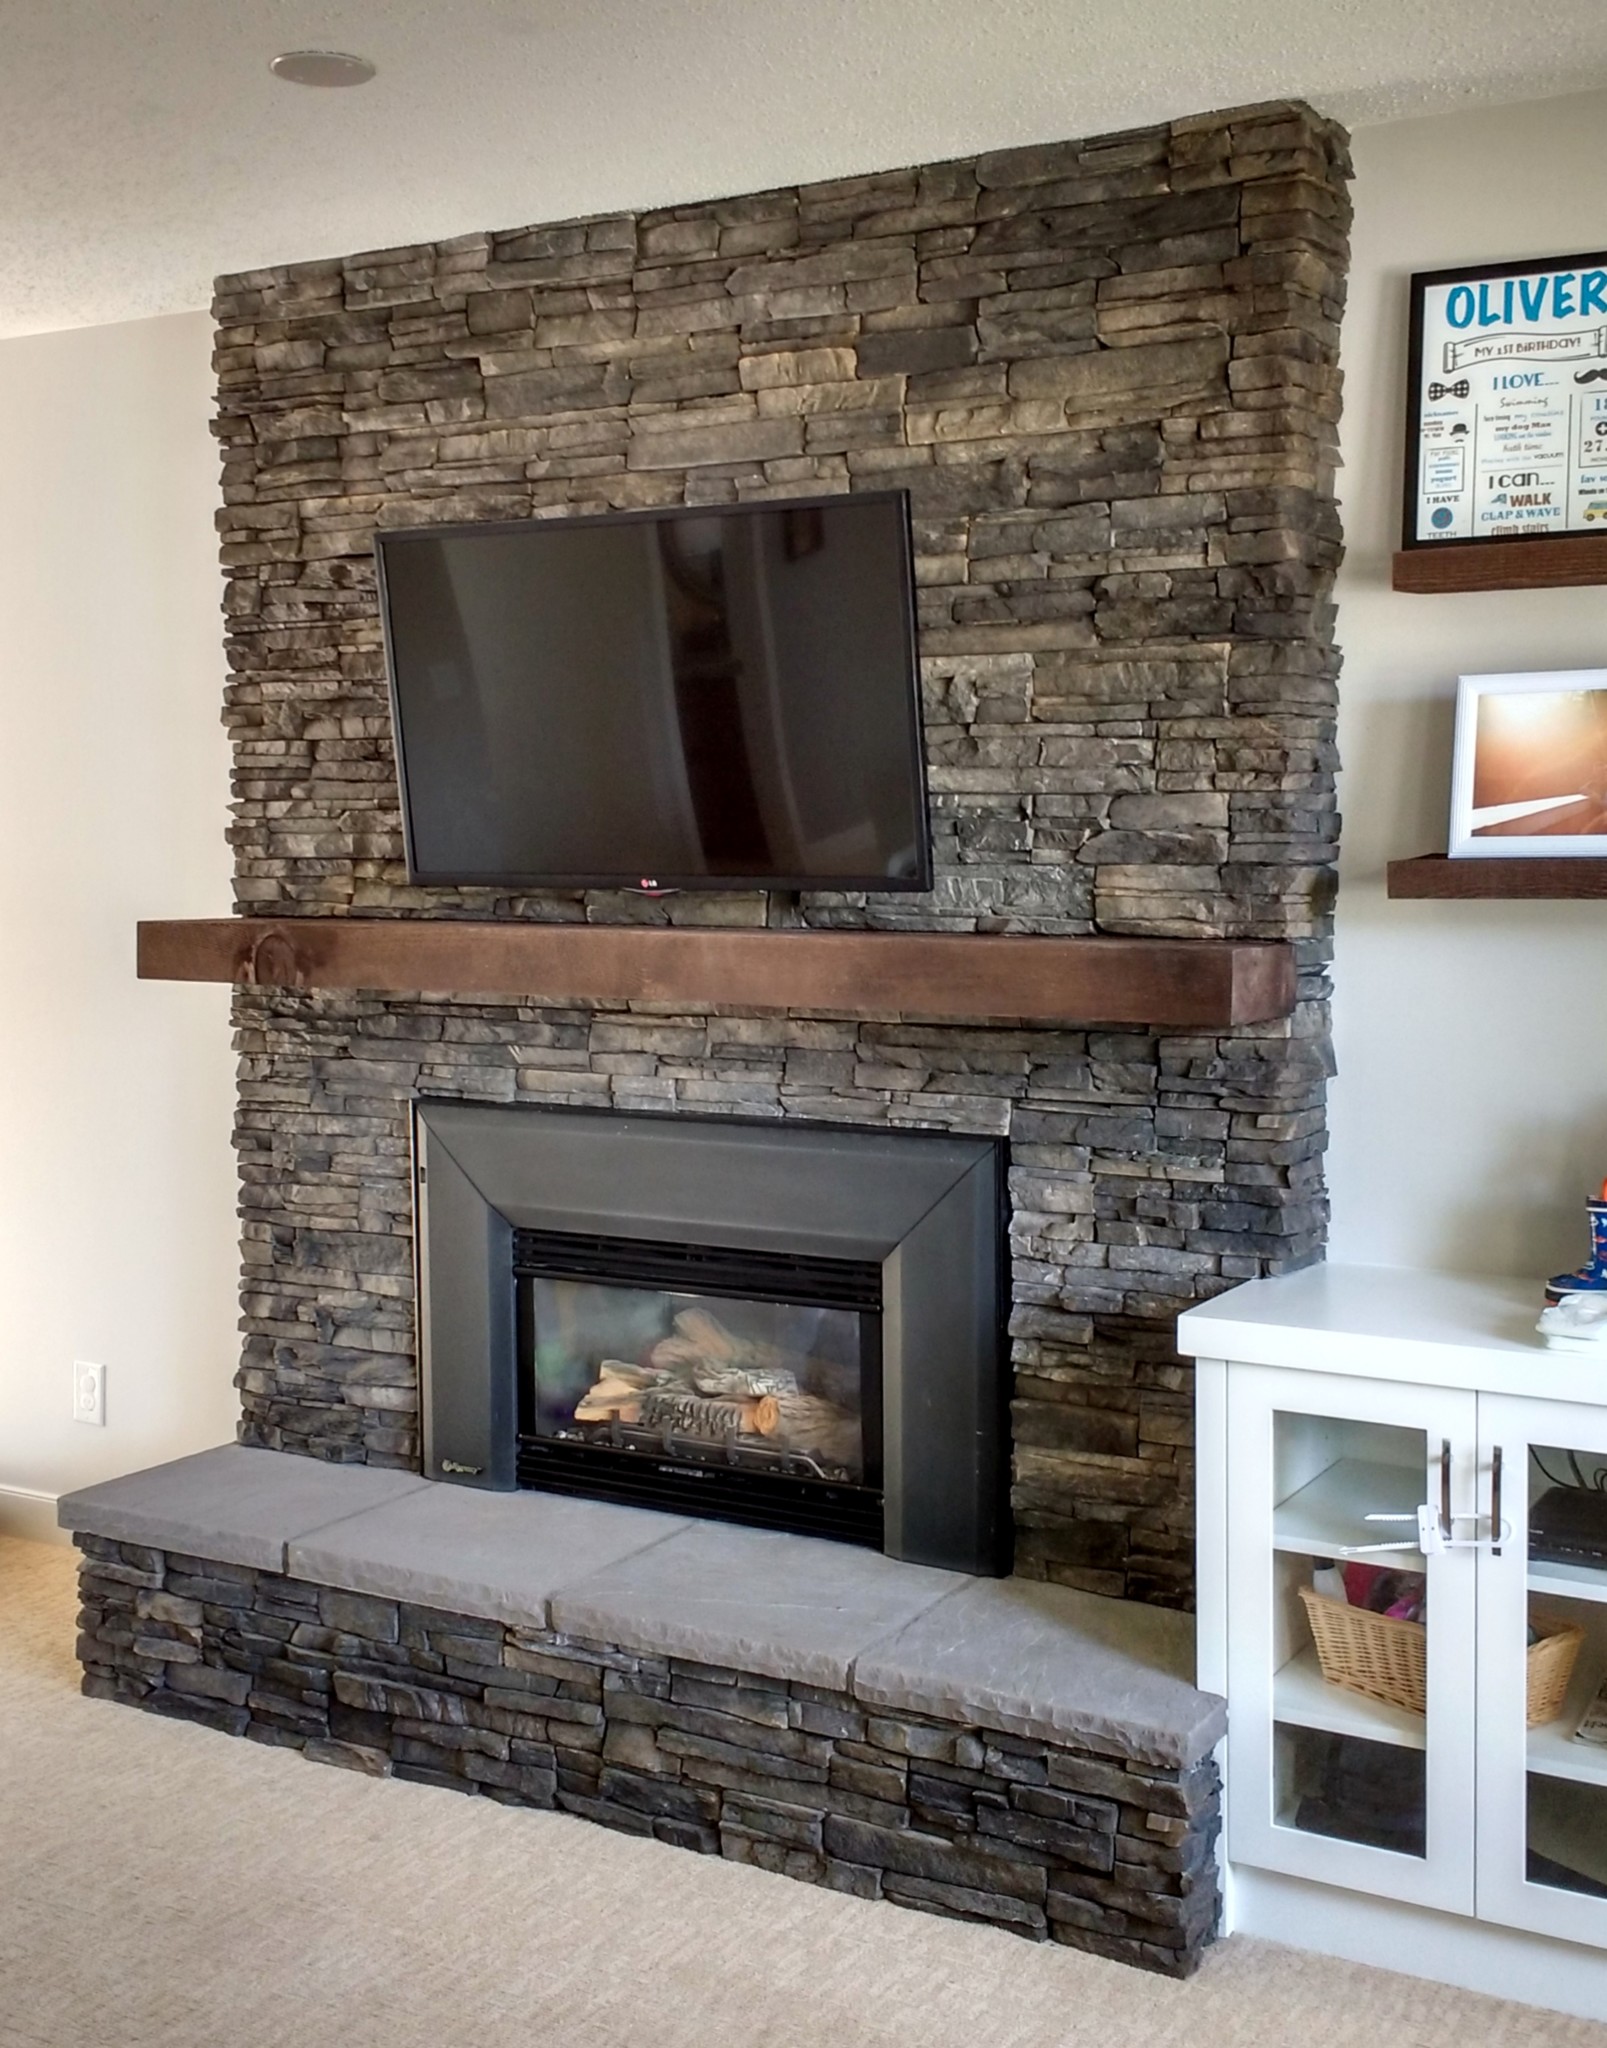 Covering fireplace brick with wood